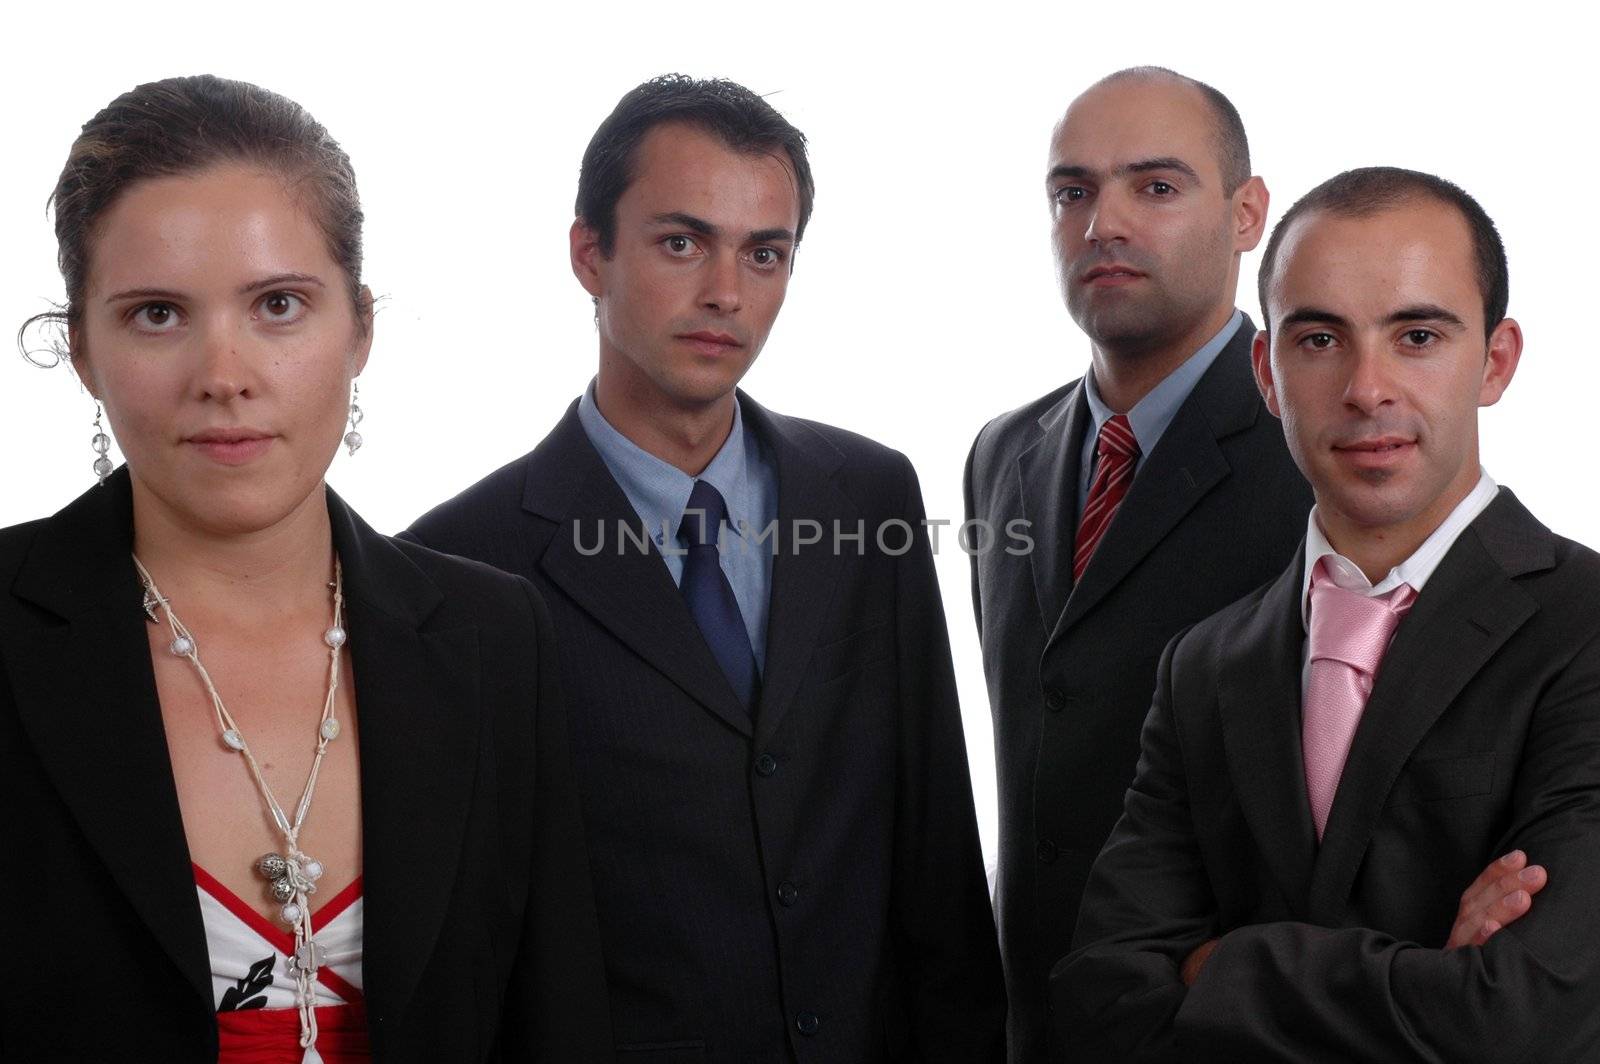 Group of young business people isolated on white. To provide maximum quality I made this image by combination of two photos.